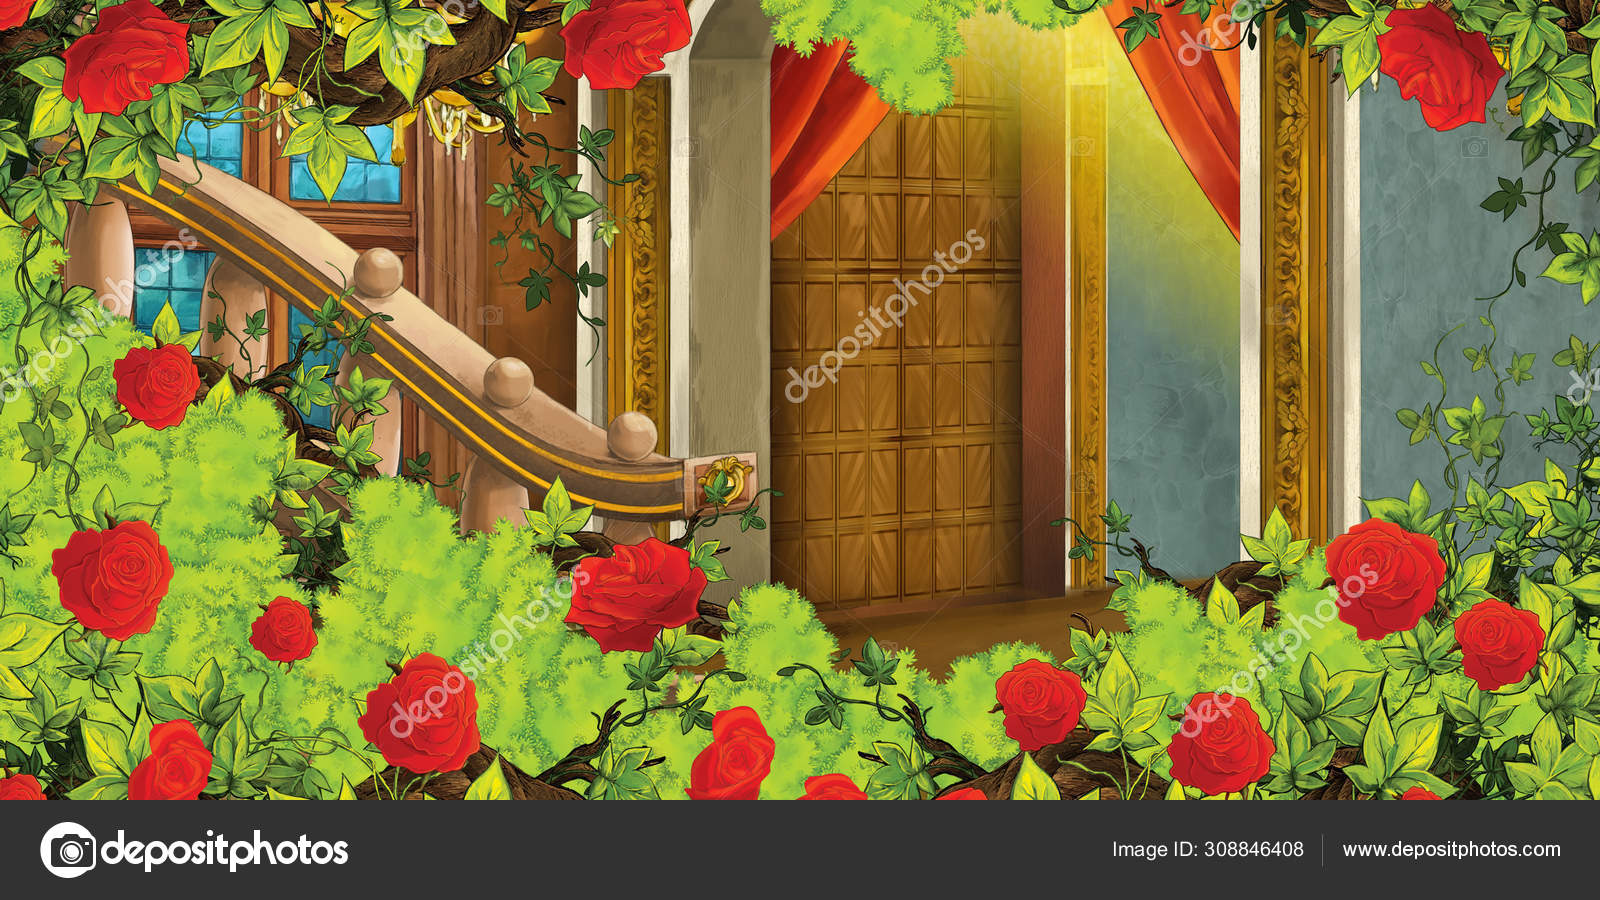 Cartoon scene with medieval castle room and bush of roses - interior for  different usage - illustration for children Stock Photo by ©illustrator_hft  308846408